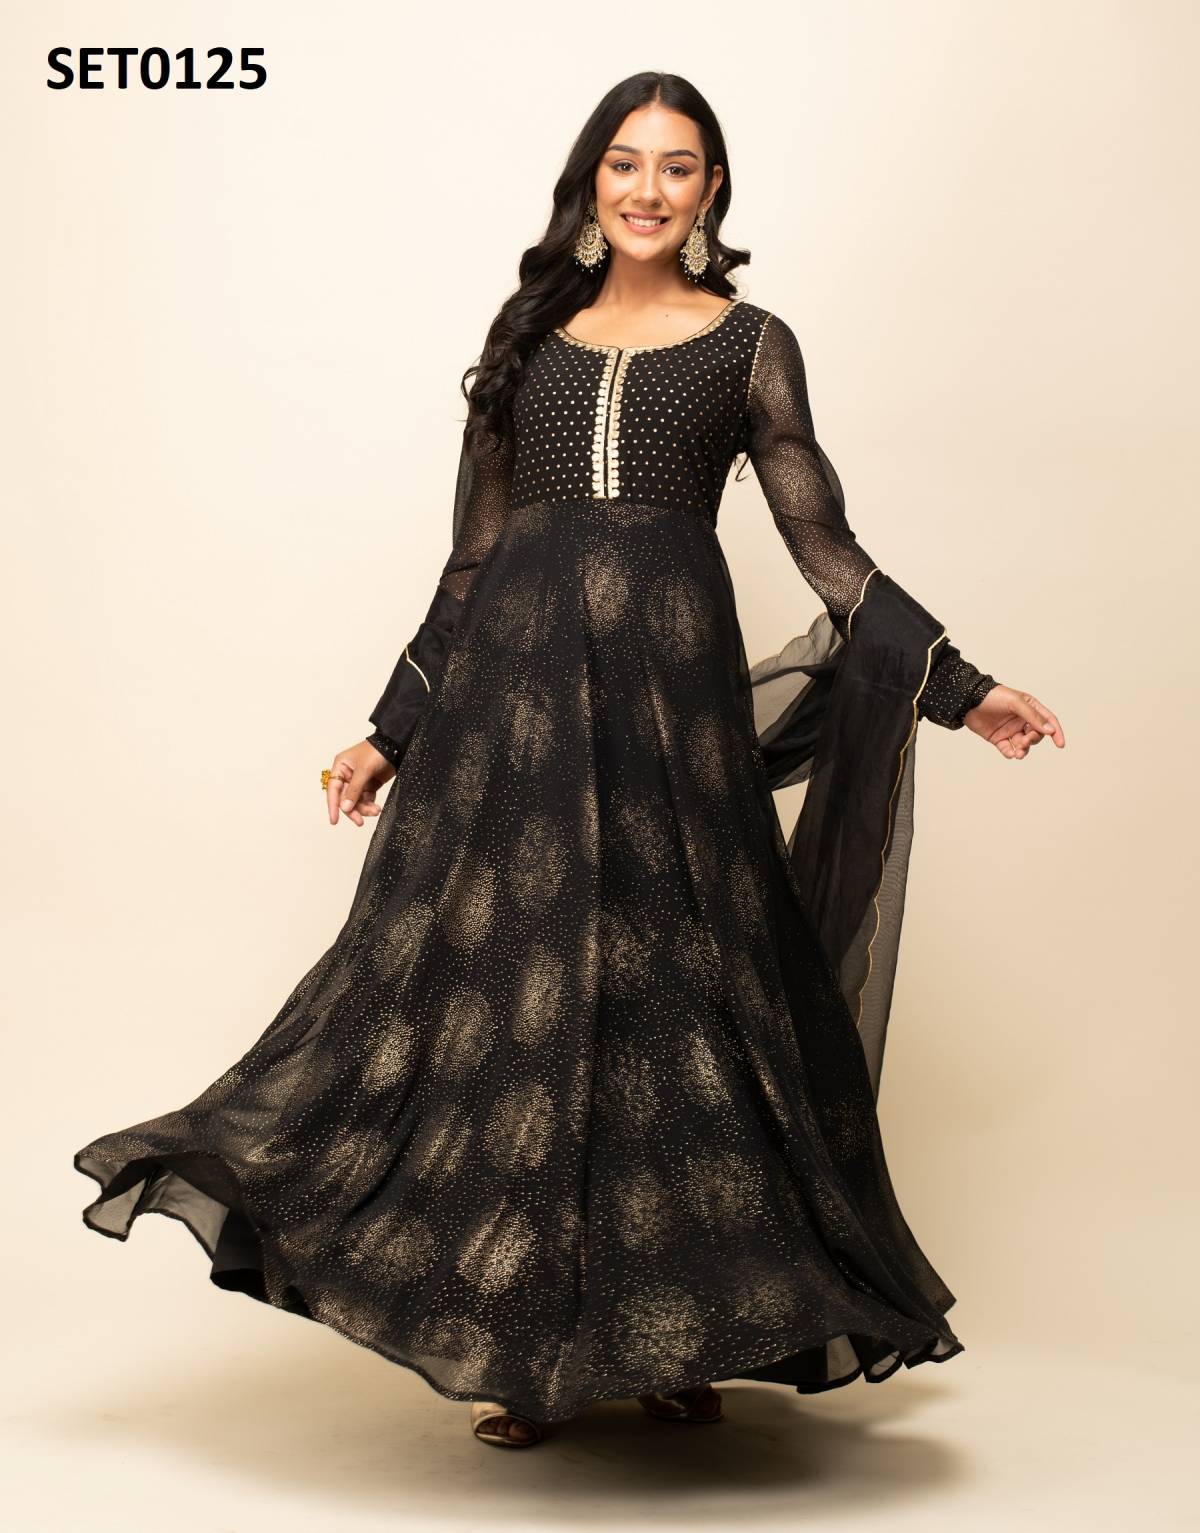 Where can I buy women's formal clothes in Delhi? - Quora